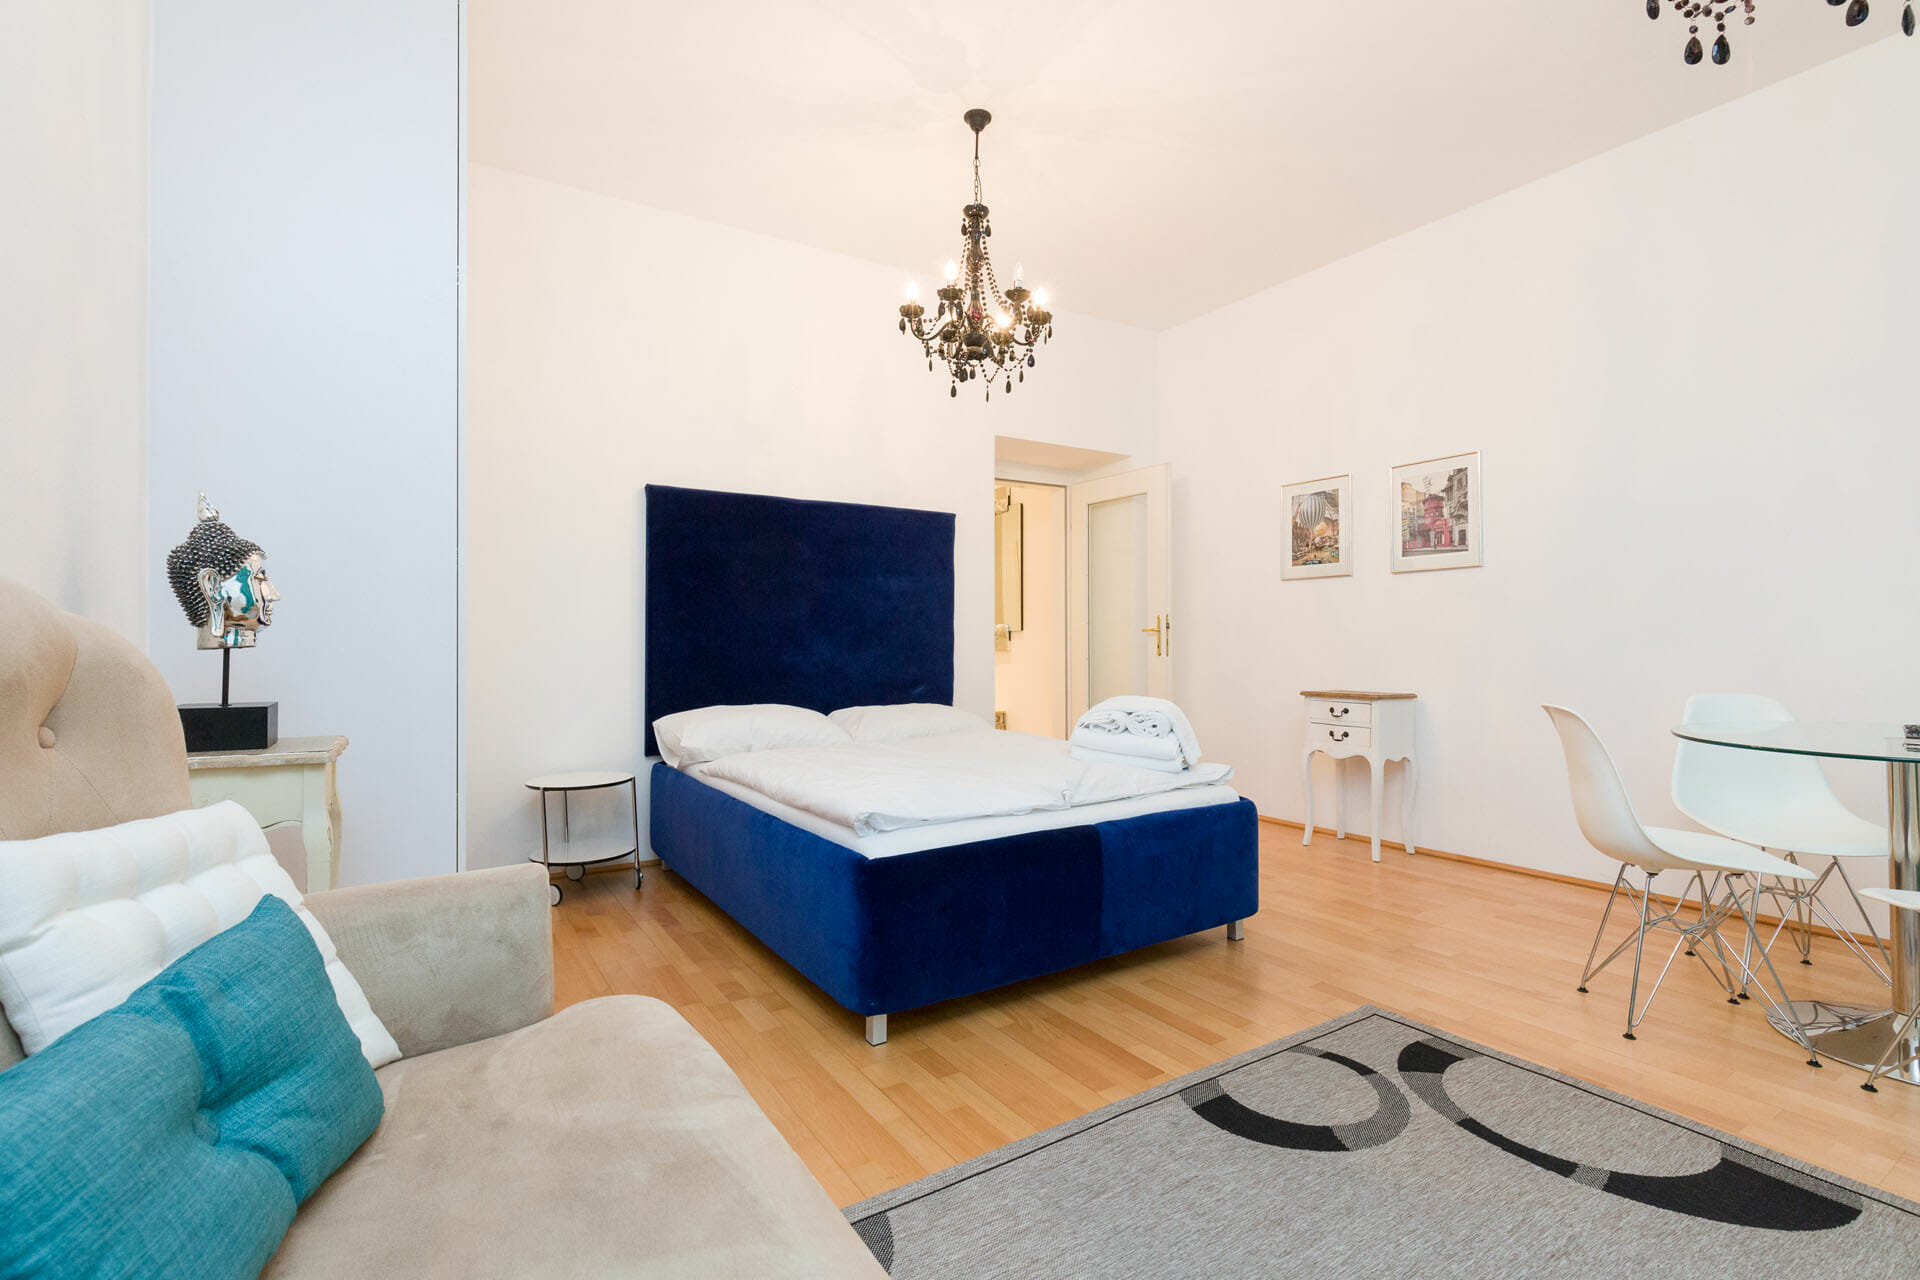 Apartments in Vienna Austria. Alser Strasse 14. Cosy studio apartment.Premium Studio Close to City Center.Everything is located nearby. The main hospital, AKH is 300 meters away. Public transportation is at the doorstep. 